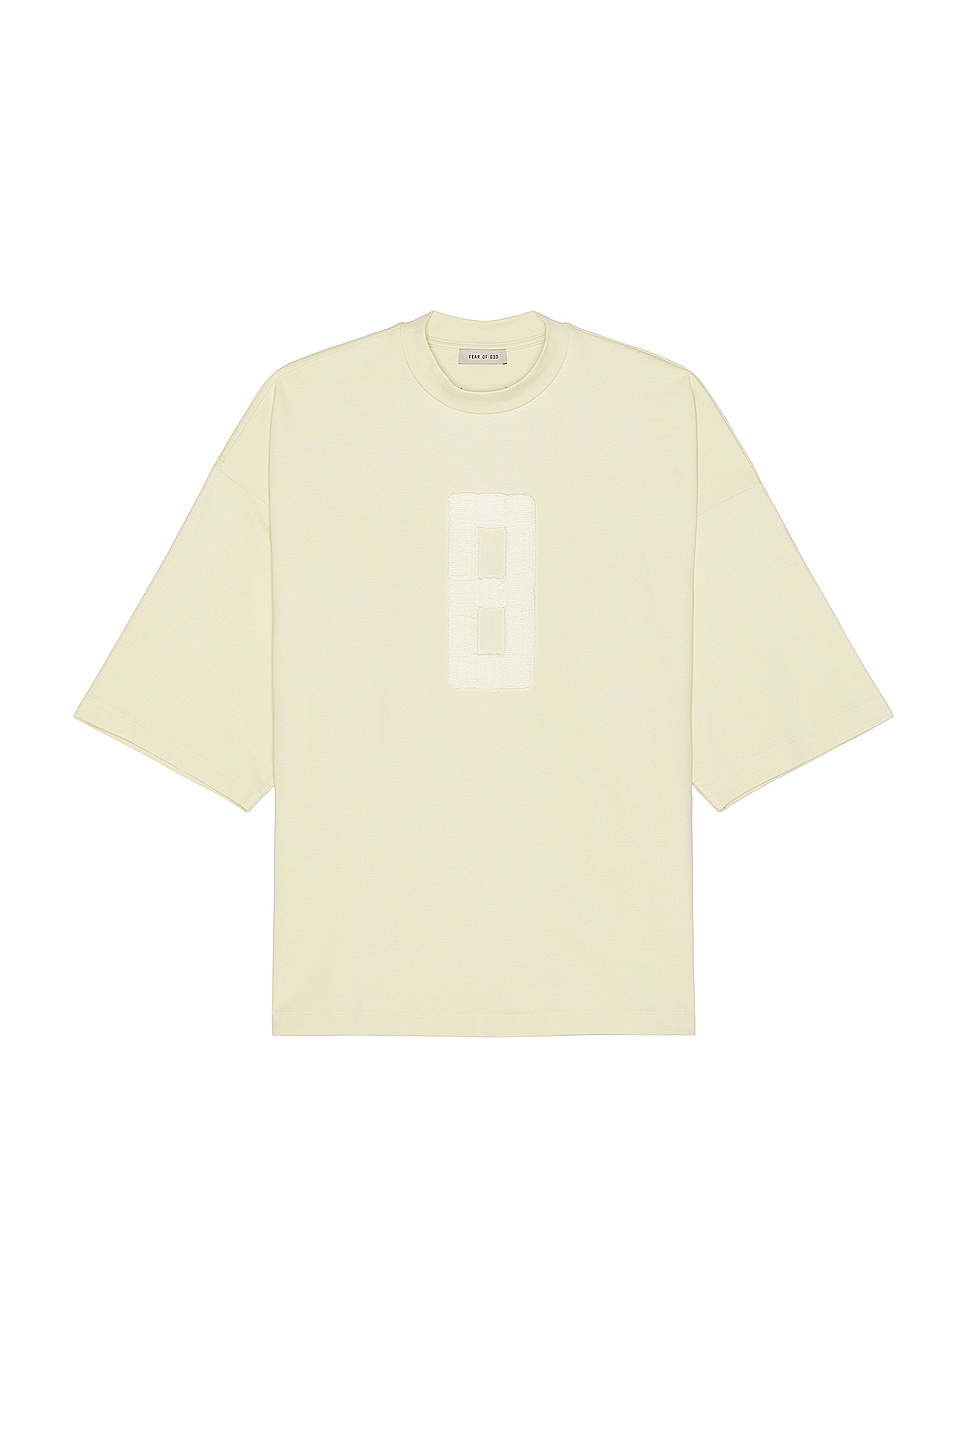 Image 1 of Fear of God Embroidered 8 Milano Tee in Lemon Cream